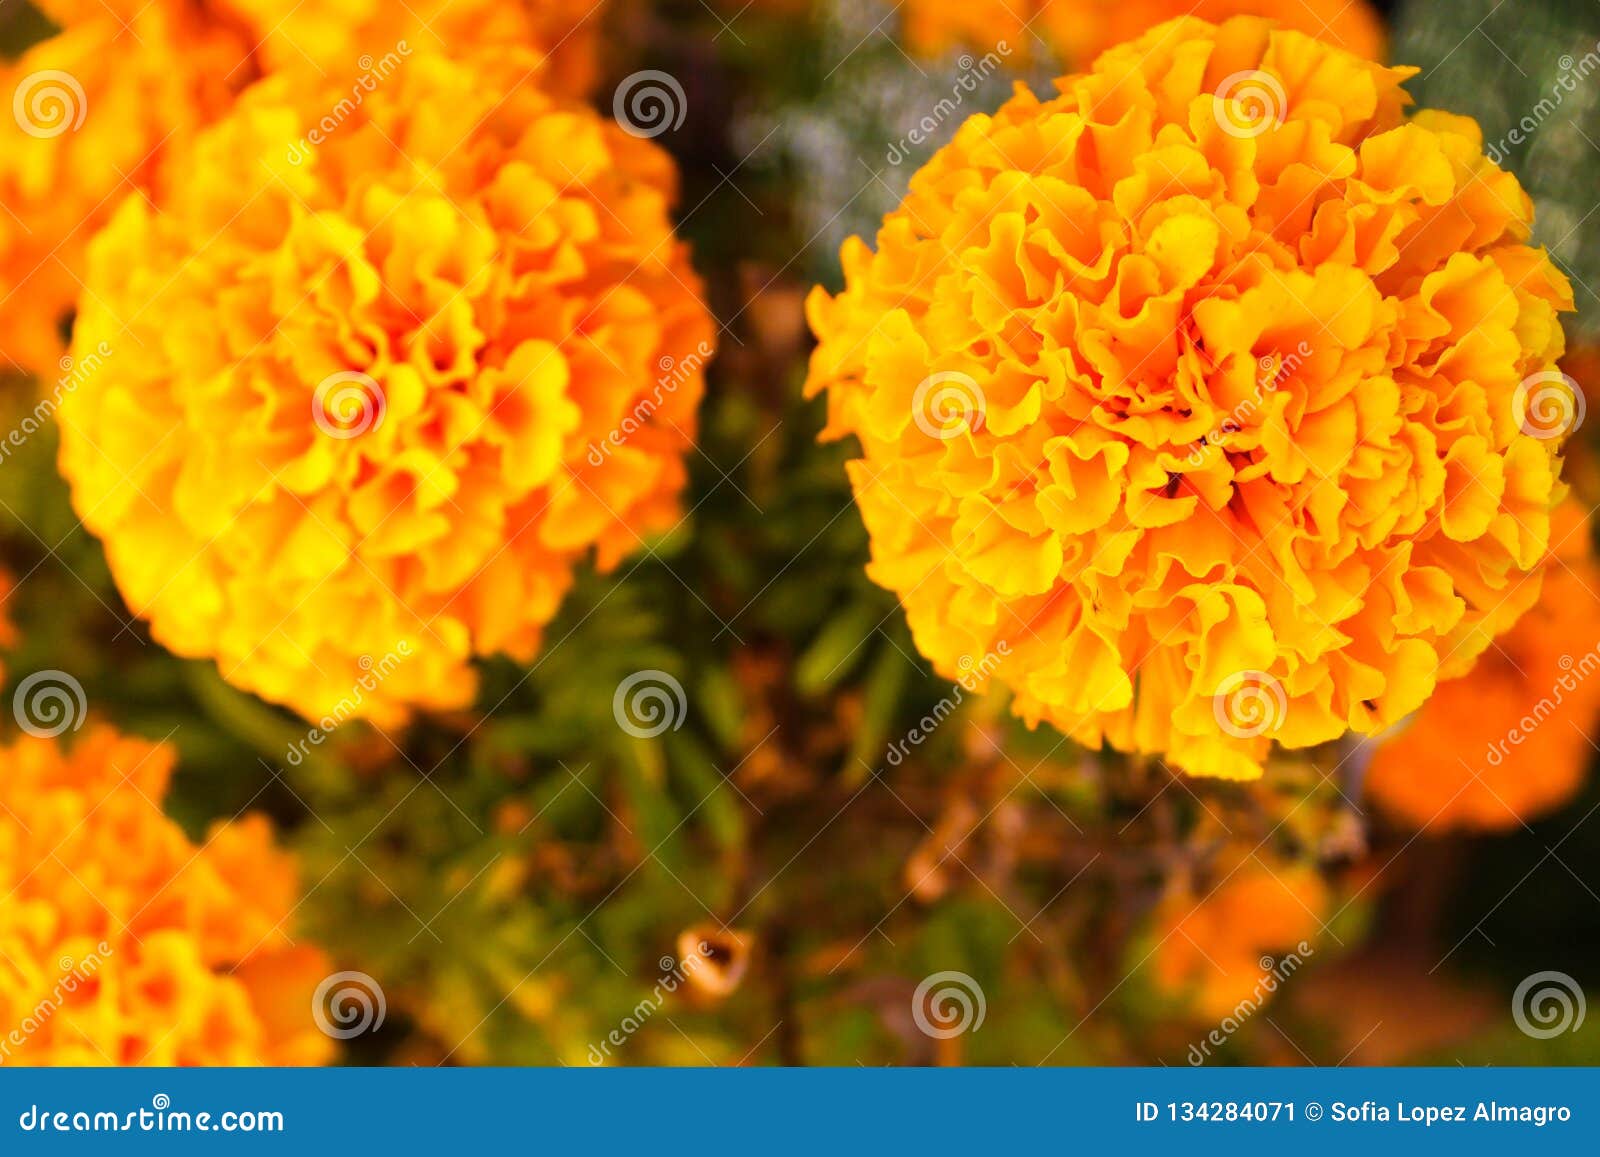 Chiinese Carnation in Yellow Nature Stock Image - Image of flora ...